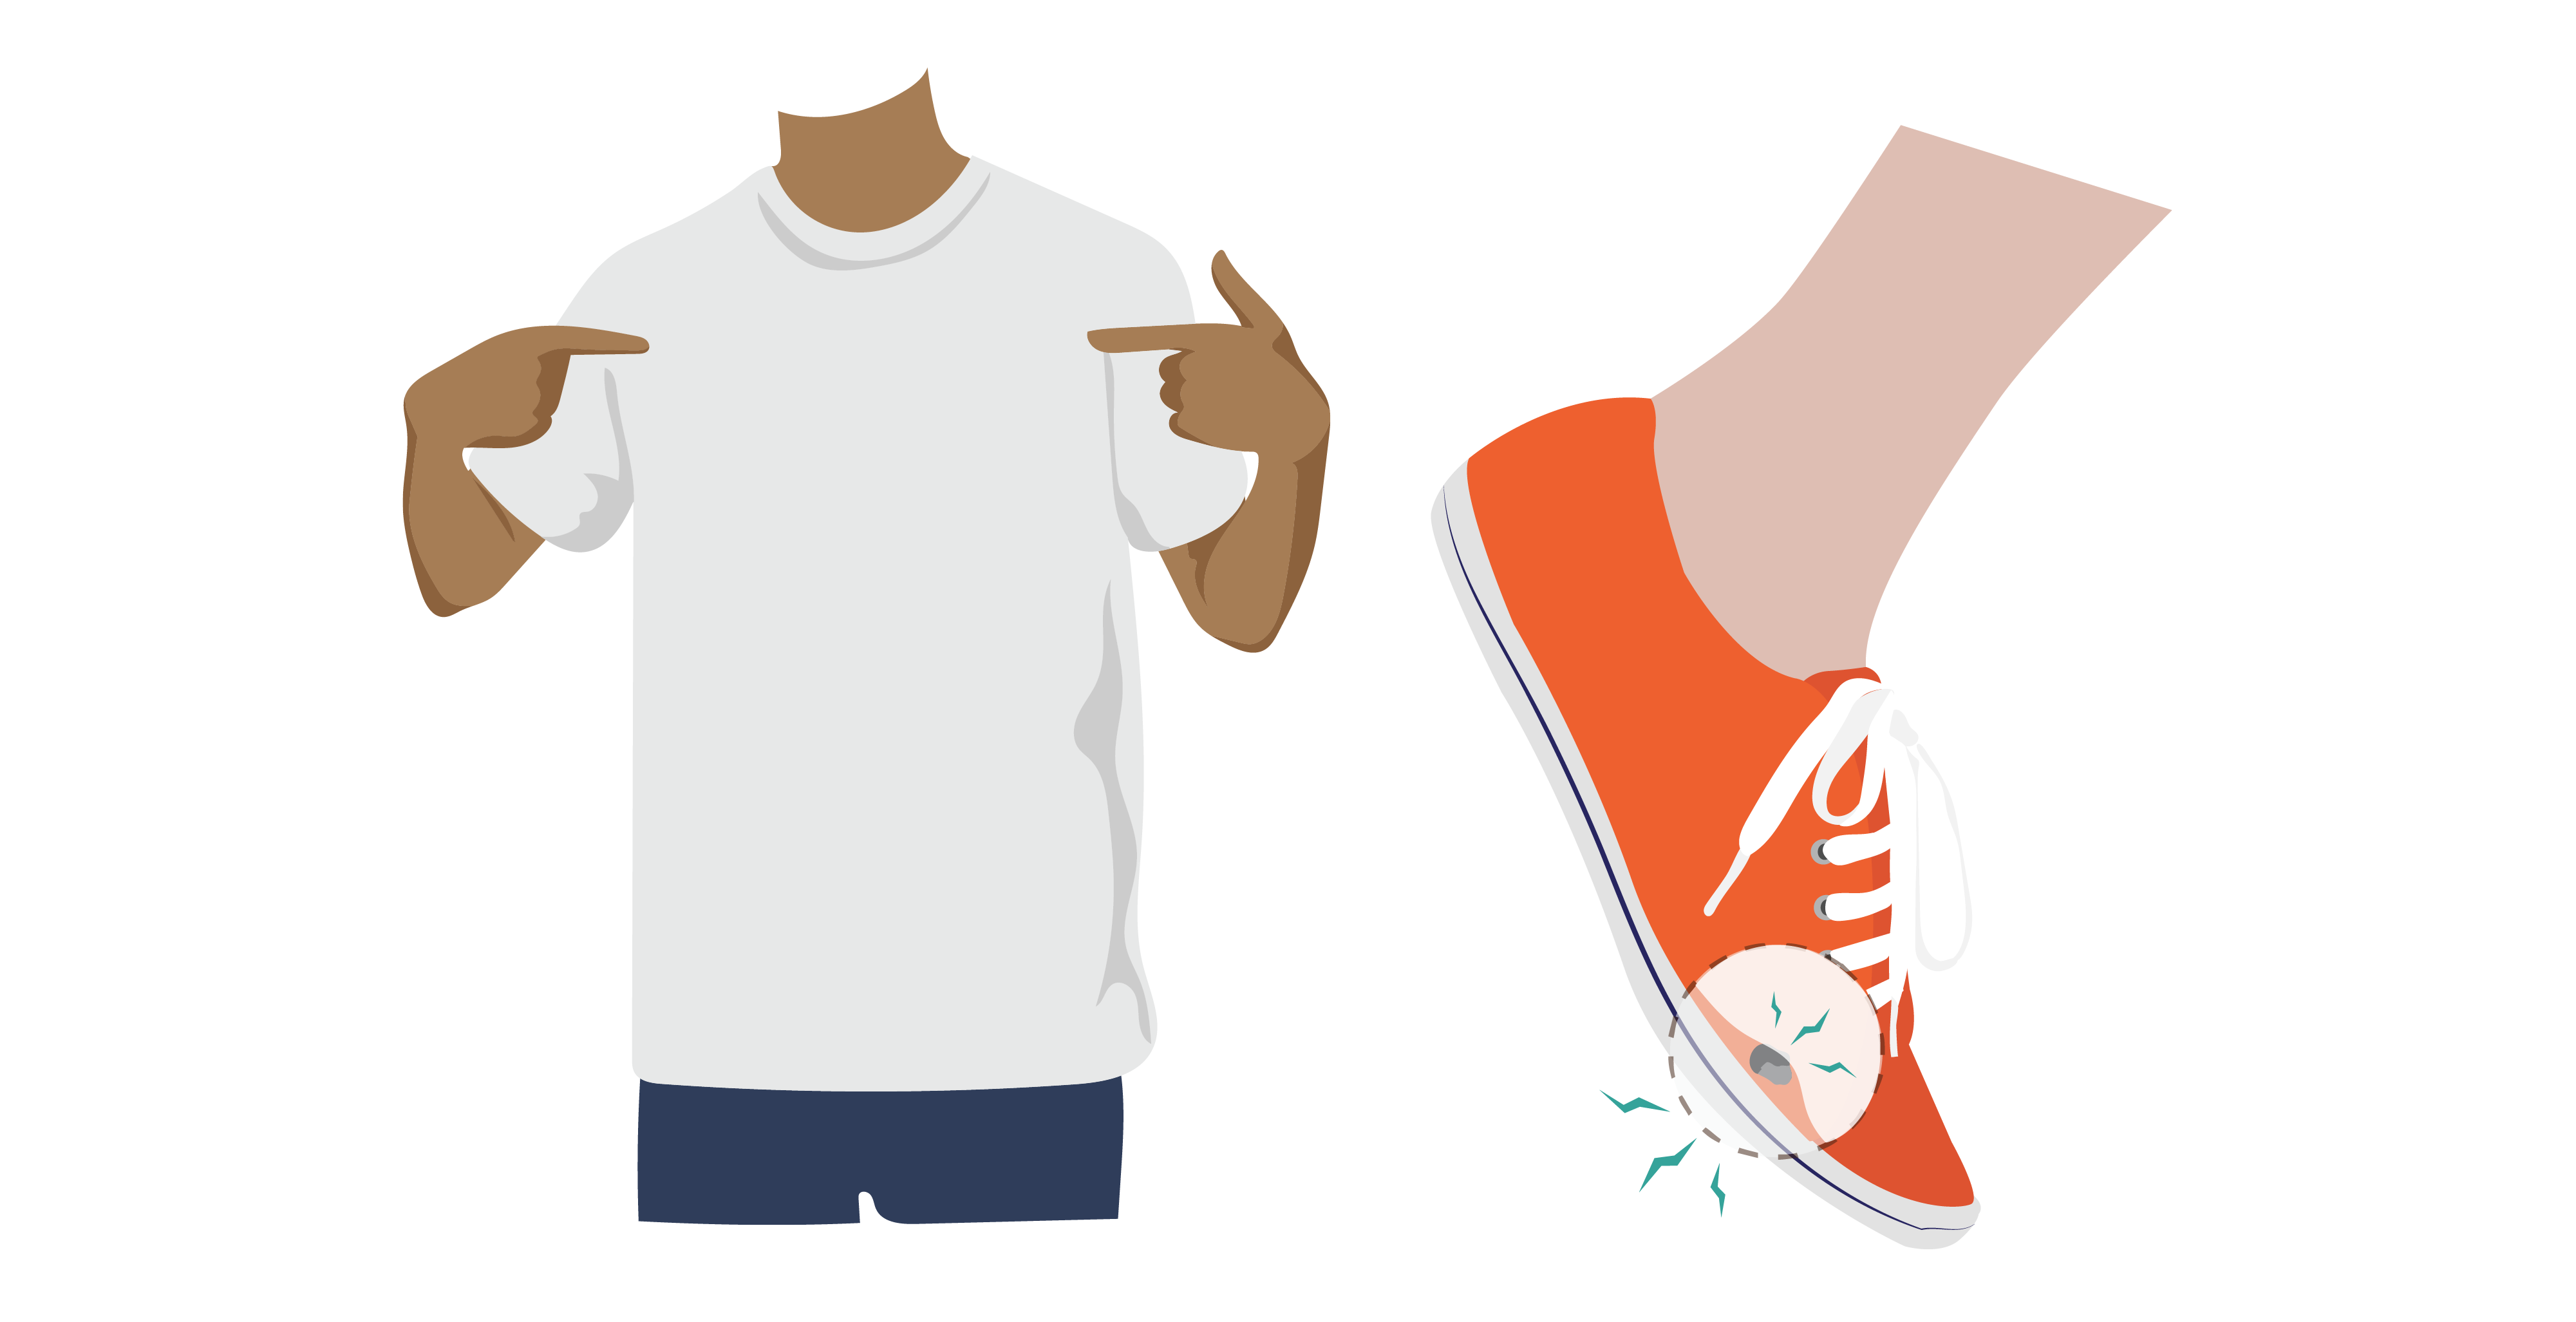 On the left, a person in a white t-shirt points at their shirt to show passive touch. On the right, a closeup of a foot walking with an orange sneaker. Around the toes is a callout with an x-ray view of the inside of the shoe, showing a rock inside.